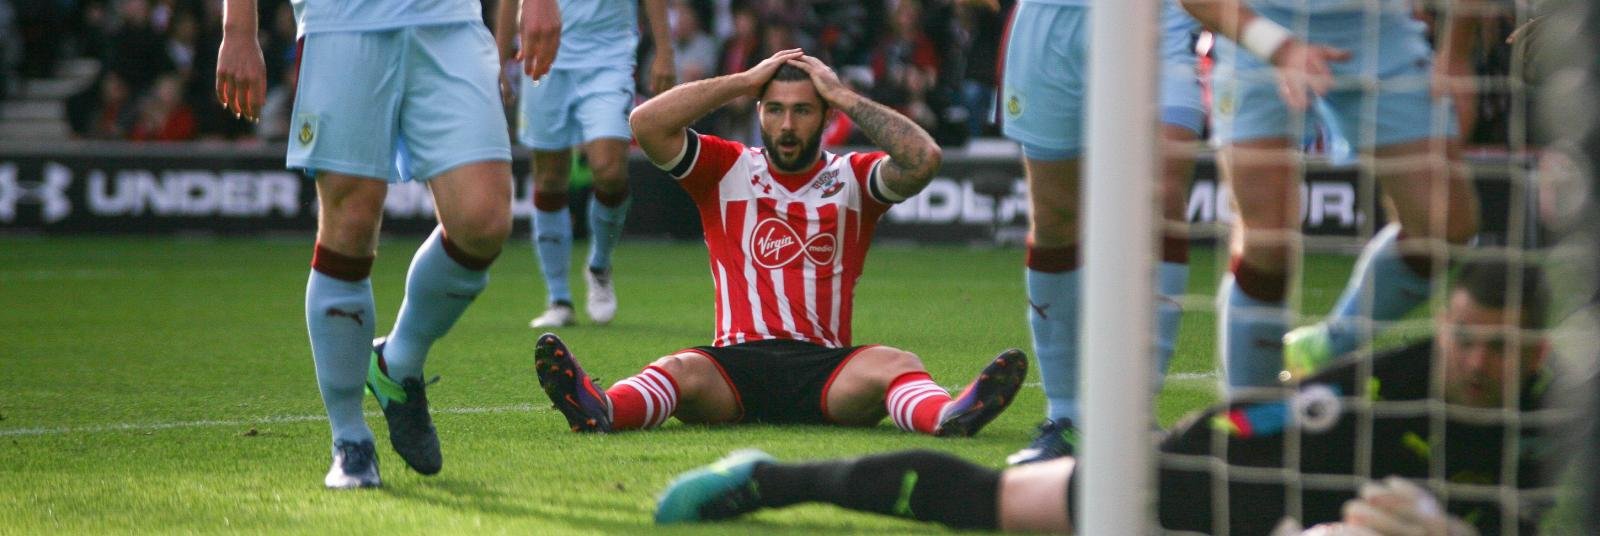 4 things Burnley can take from their defeat to Southampton